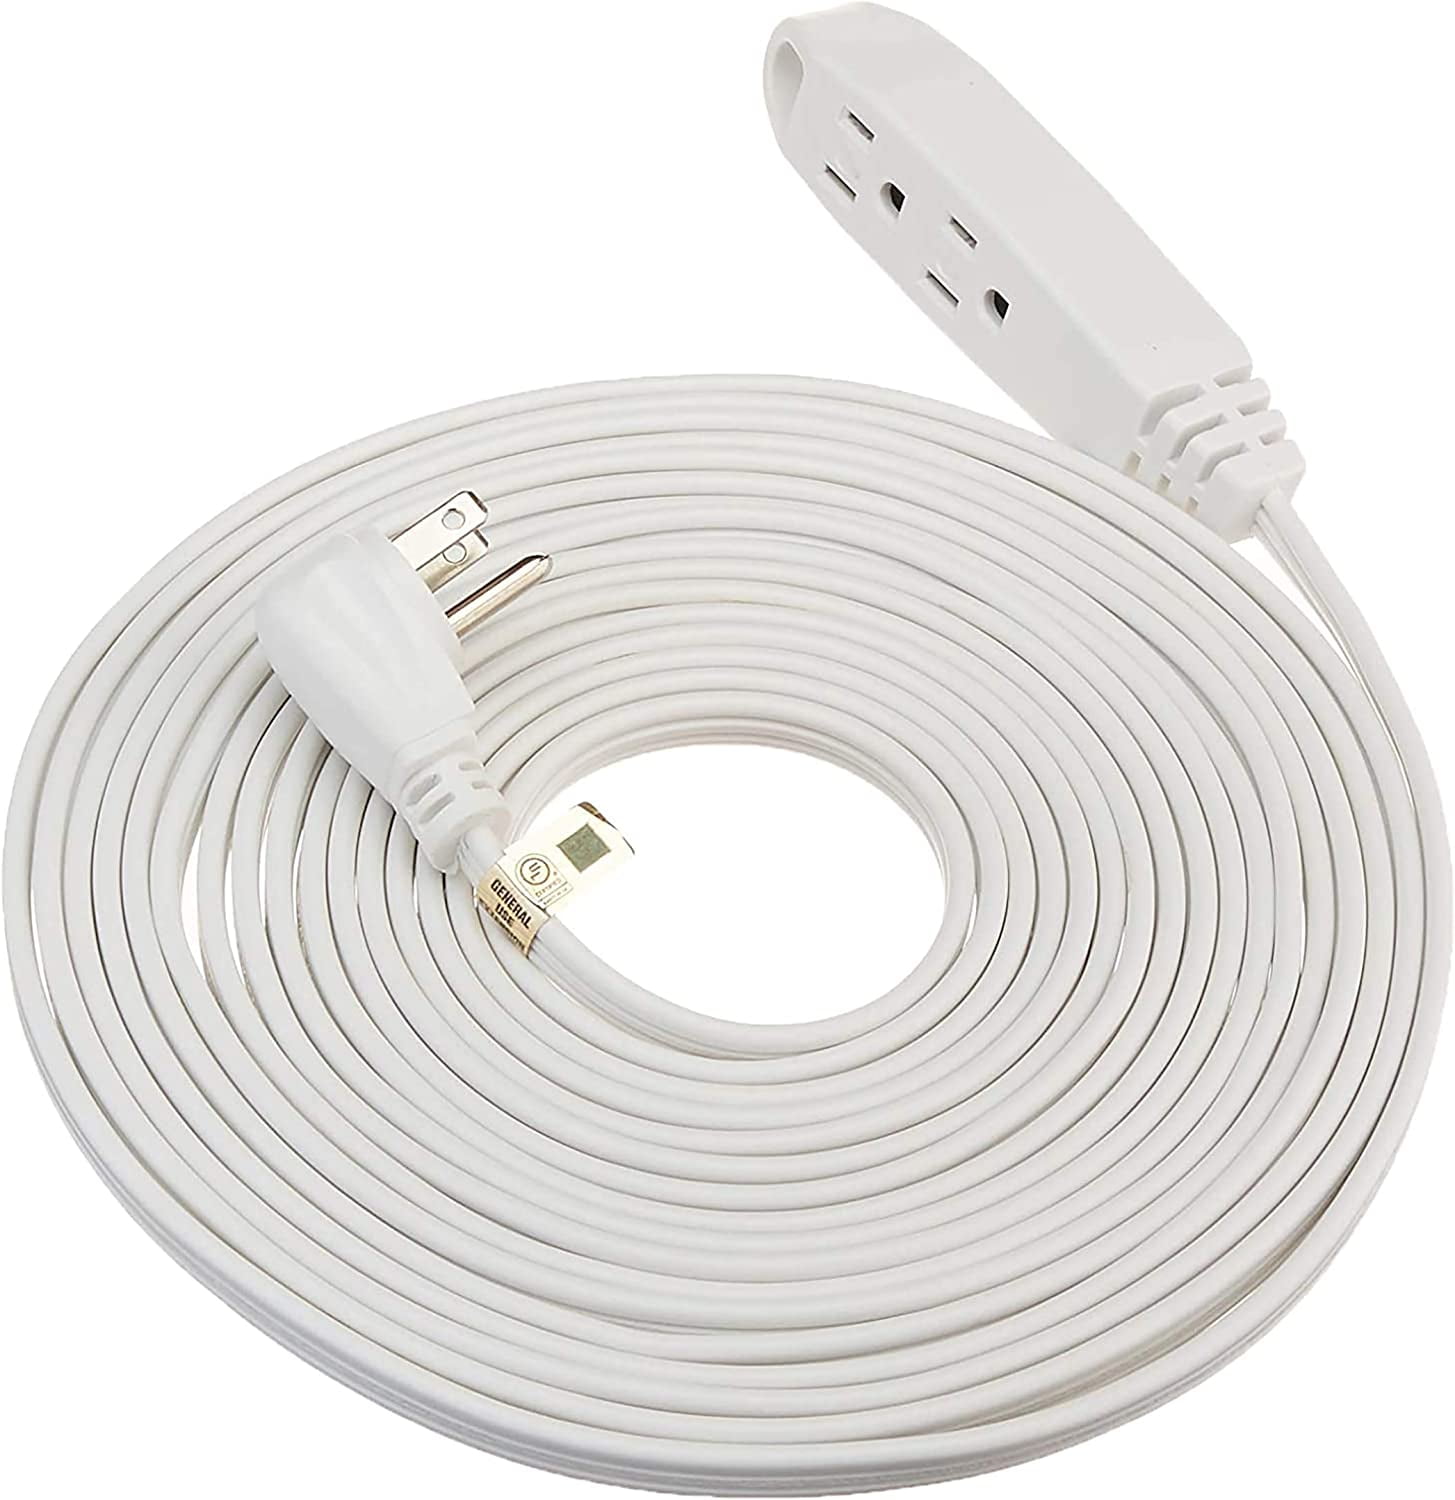 ClearMax 3 Prong Extension Cord with Multiple Outlets, Heavy Duty 3 Outlet  Extension Cord Power Outlet for Use in Home, Garage or Workshop, 16 AWG  Indoor Extension Cord White, 6 Feet 